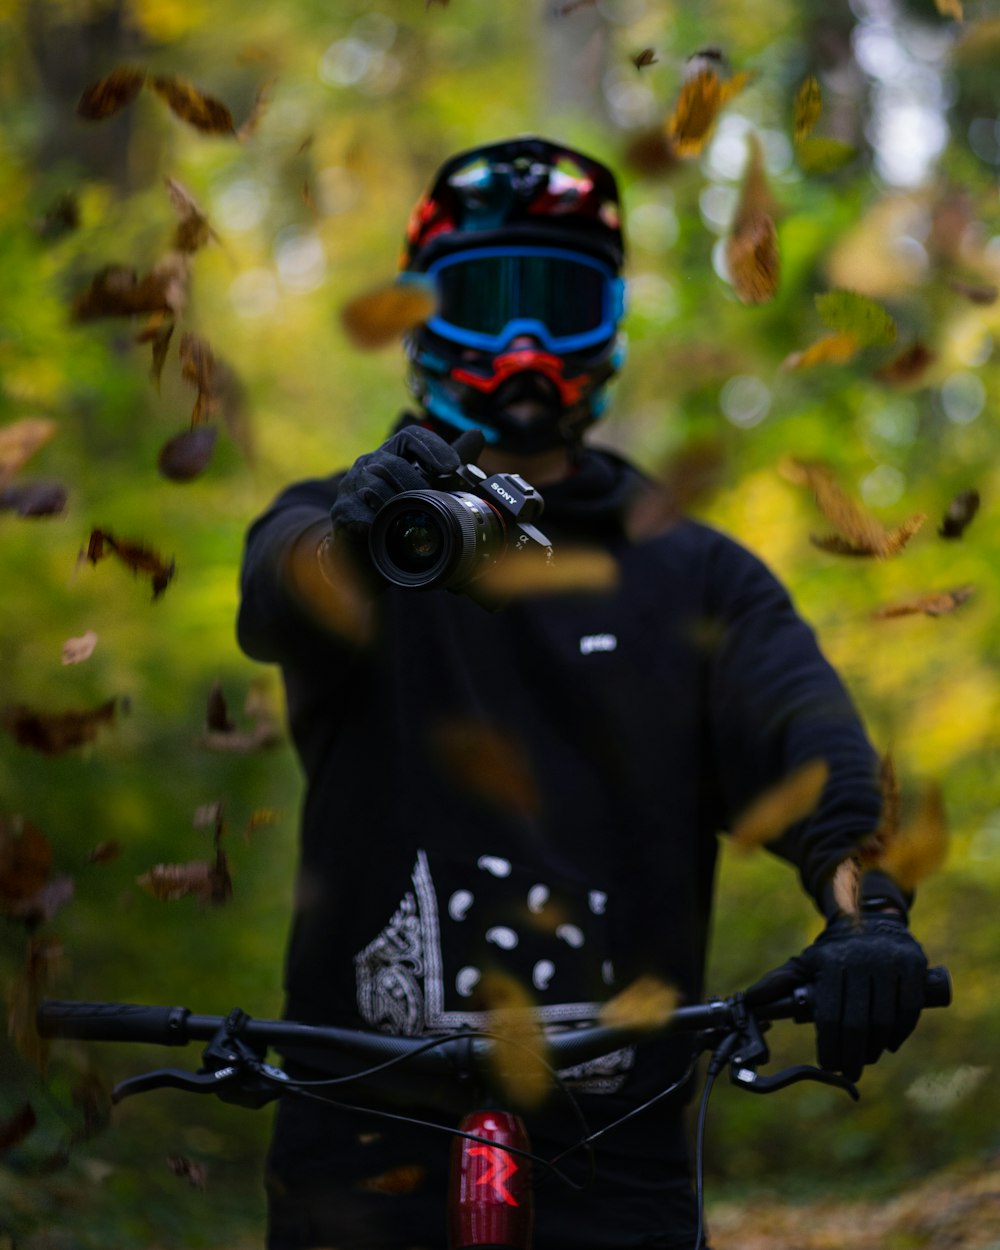 a man riding a bike through a forest filled with leaves